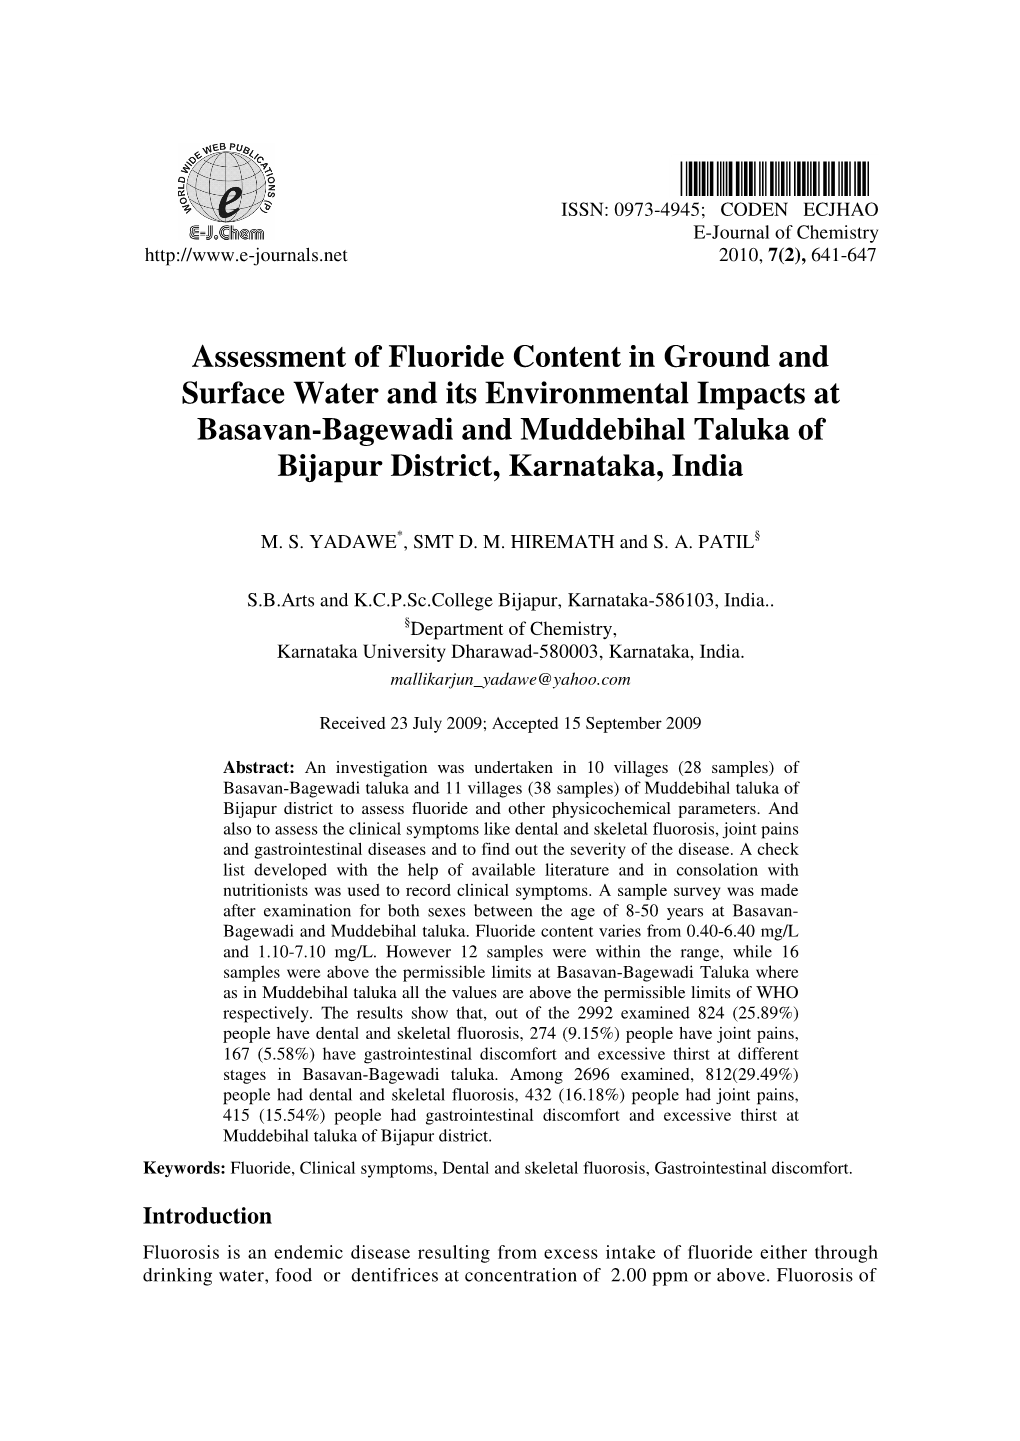 Assessment of Fluoride Content in Ground and Surface Water and Its